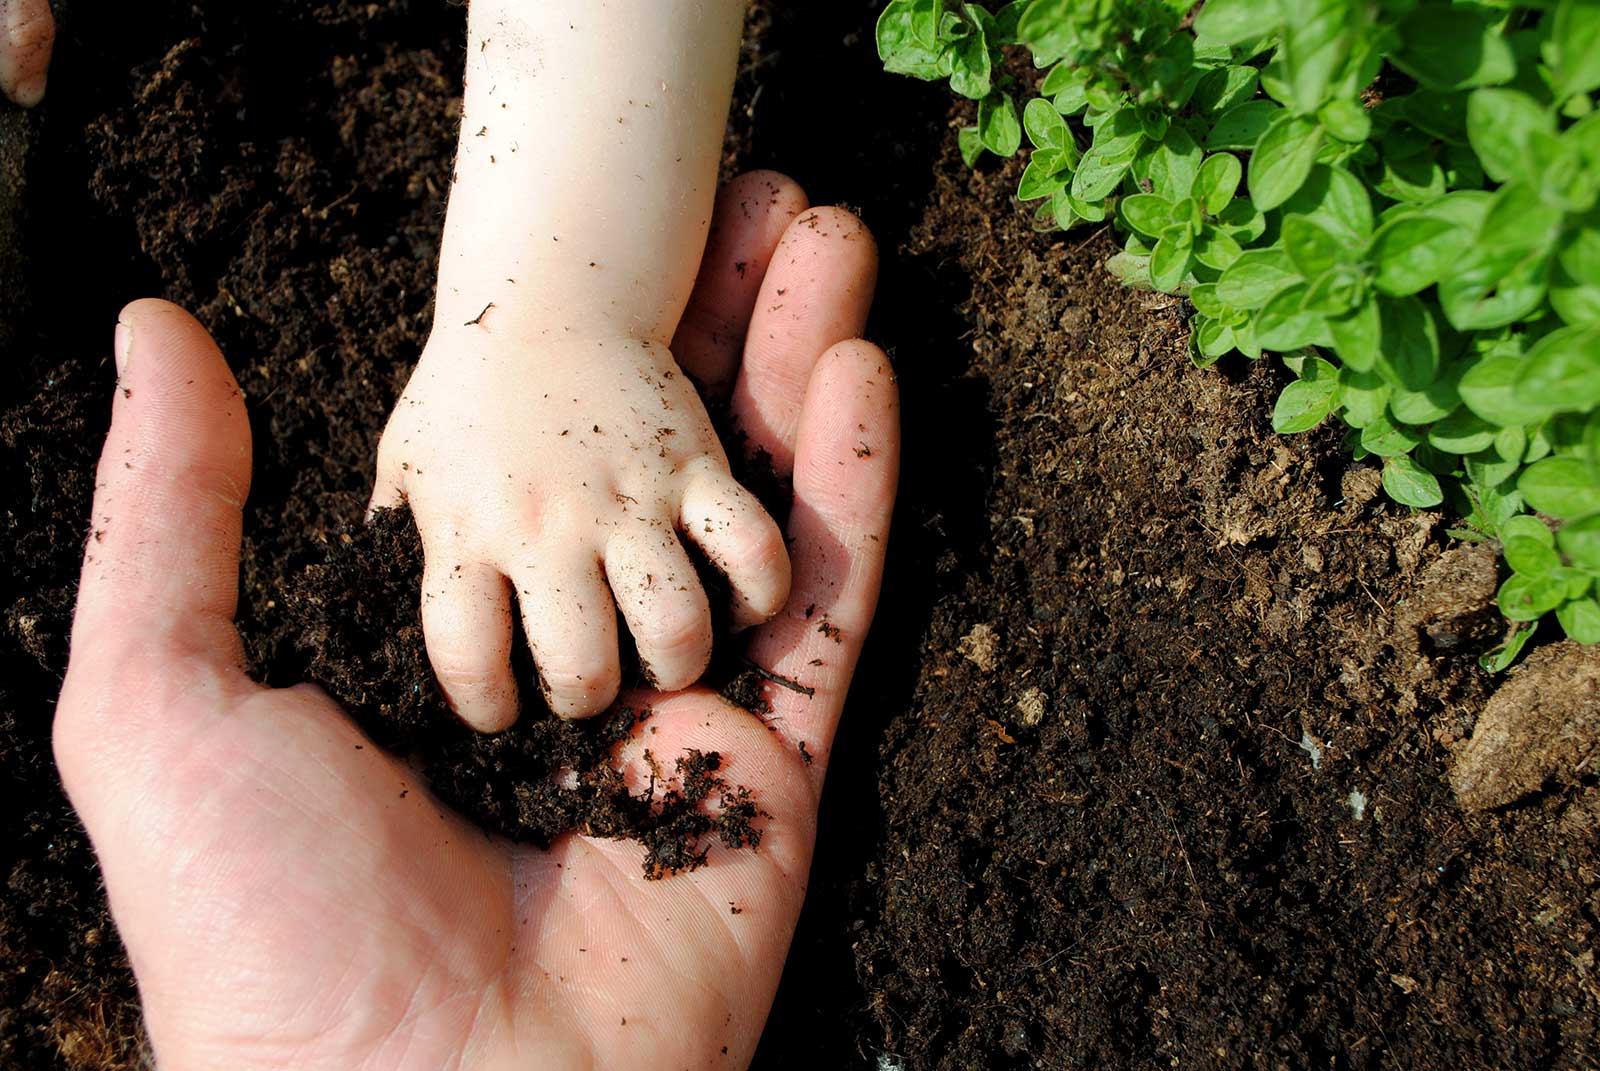 Why Soil Microbes Are Key To Your Health